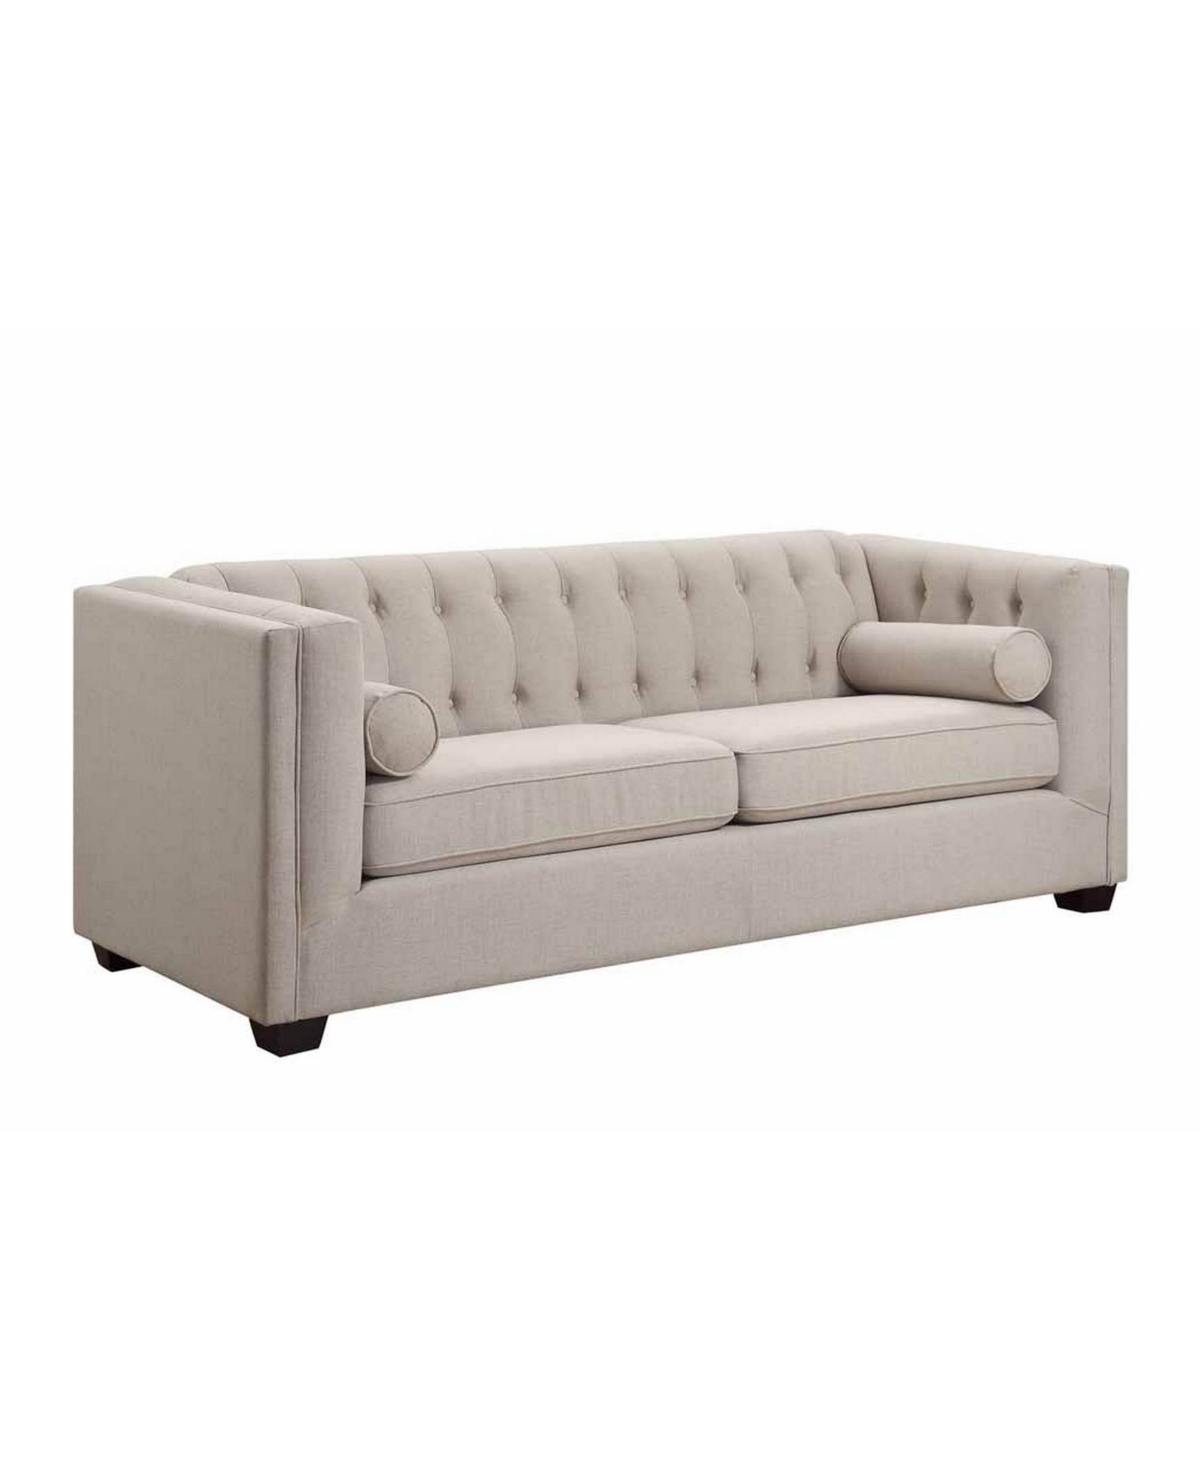 Coaster Home Furnishings Cairns Stationary Sofa with Tufted Back and Lumbar Pillows